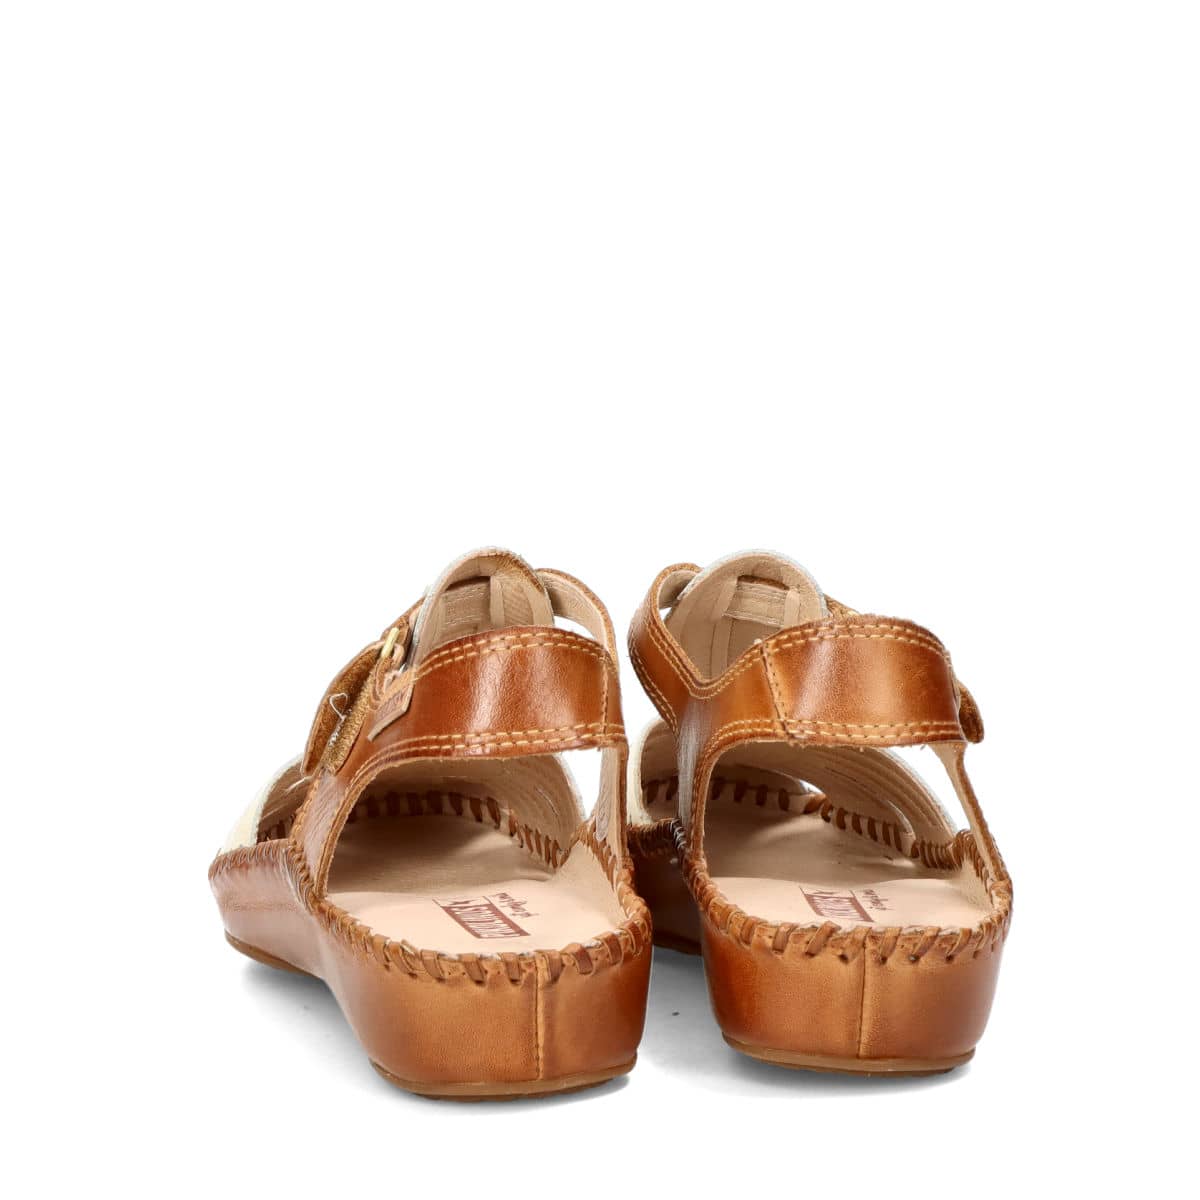 women's leather sandals - white/brown | Robel.shoes